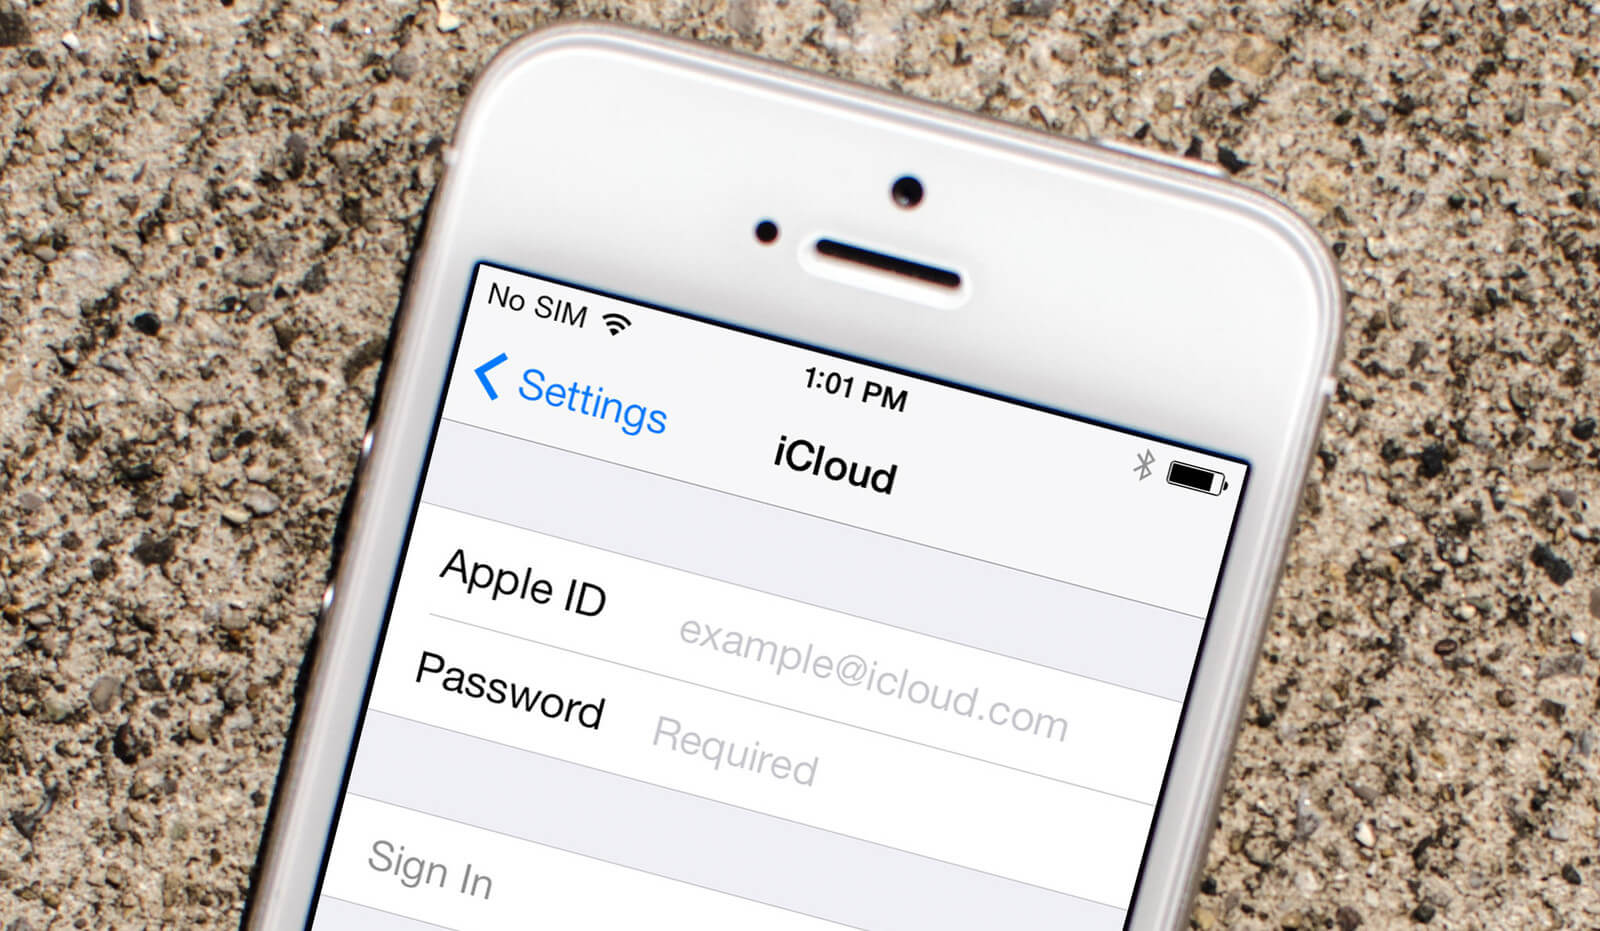 How to unblock an account on iPhone Apple ID 6, 5S, 4 